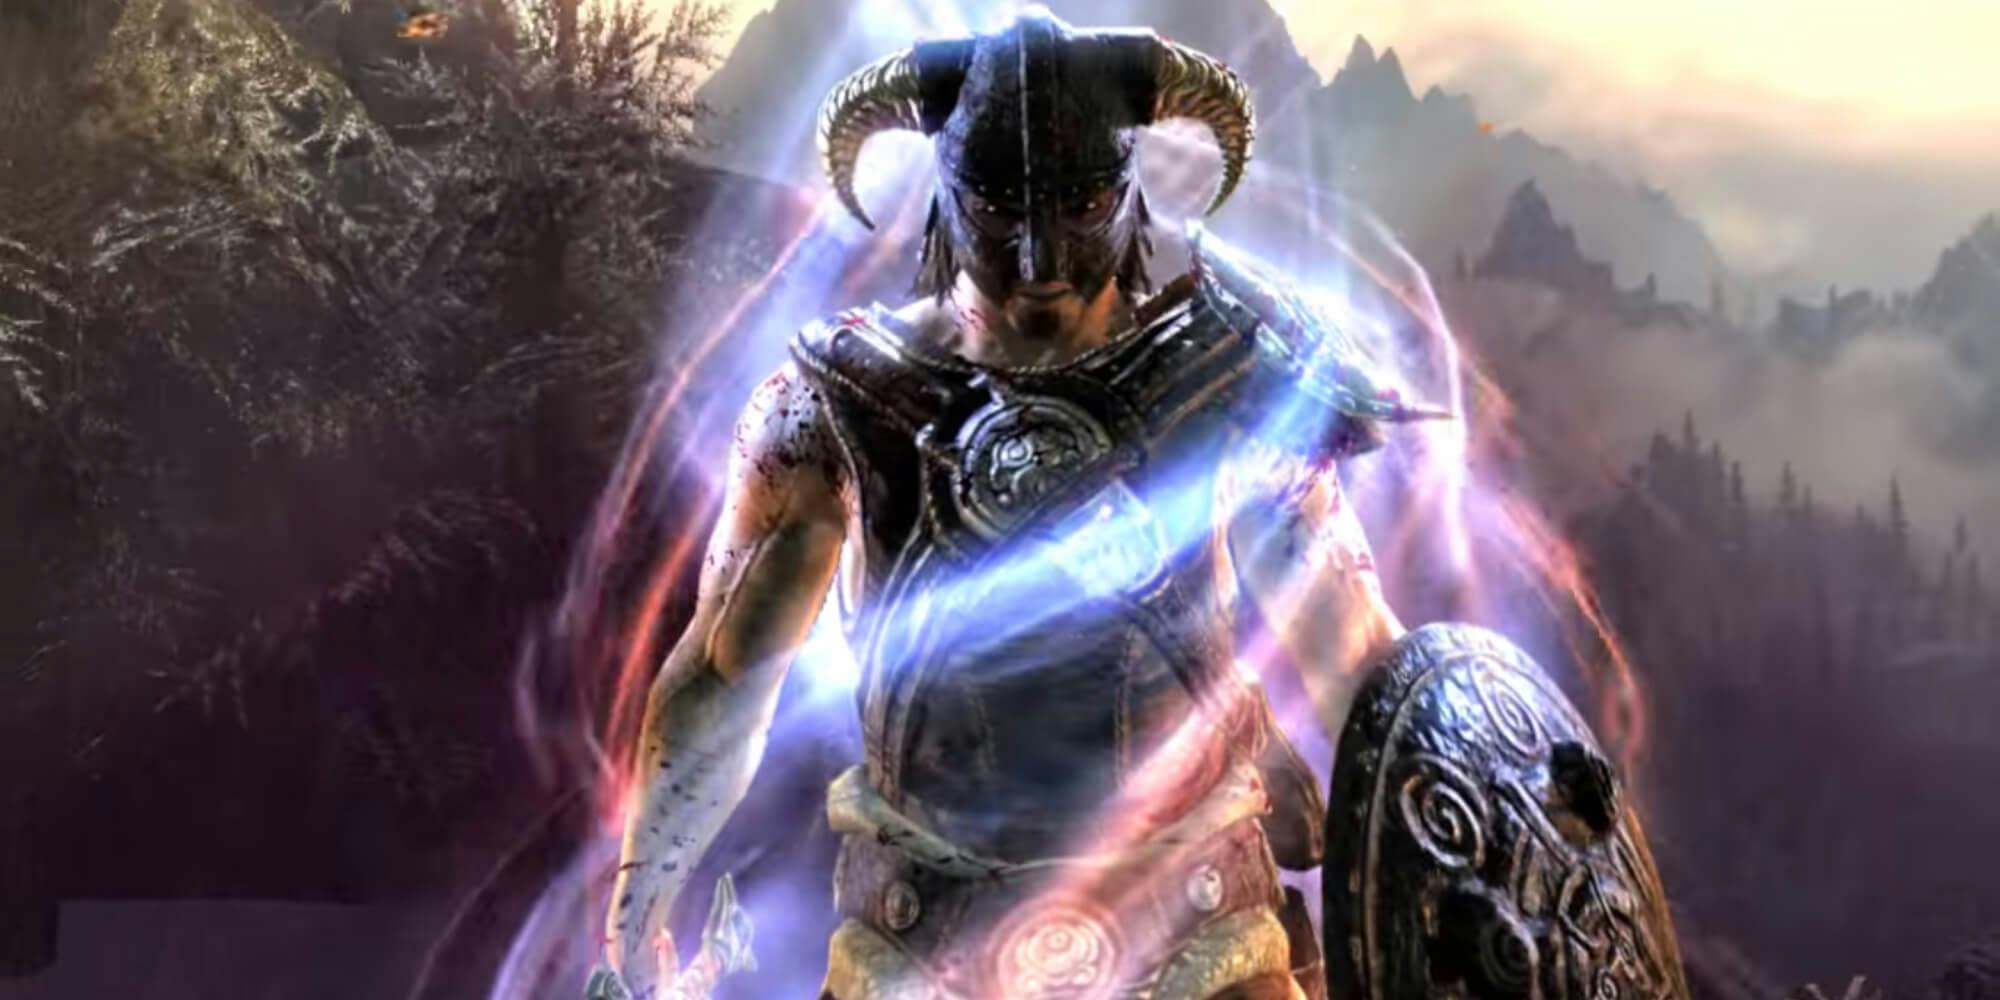 This Skyrim mod recreates the best part of Shadow of Mordor: the